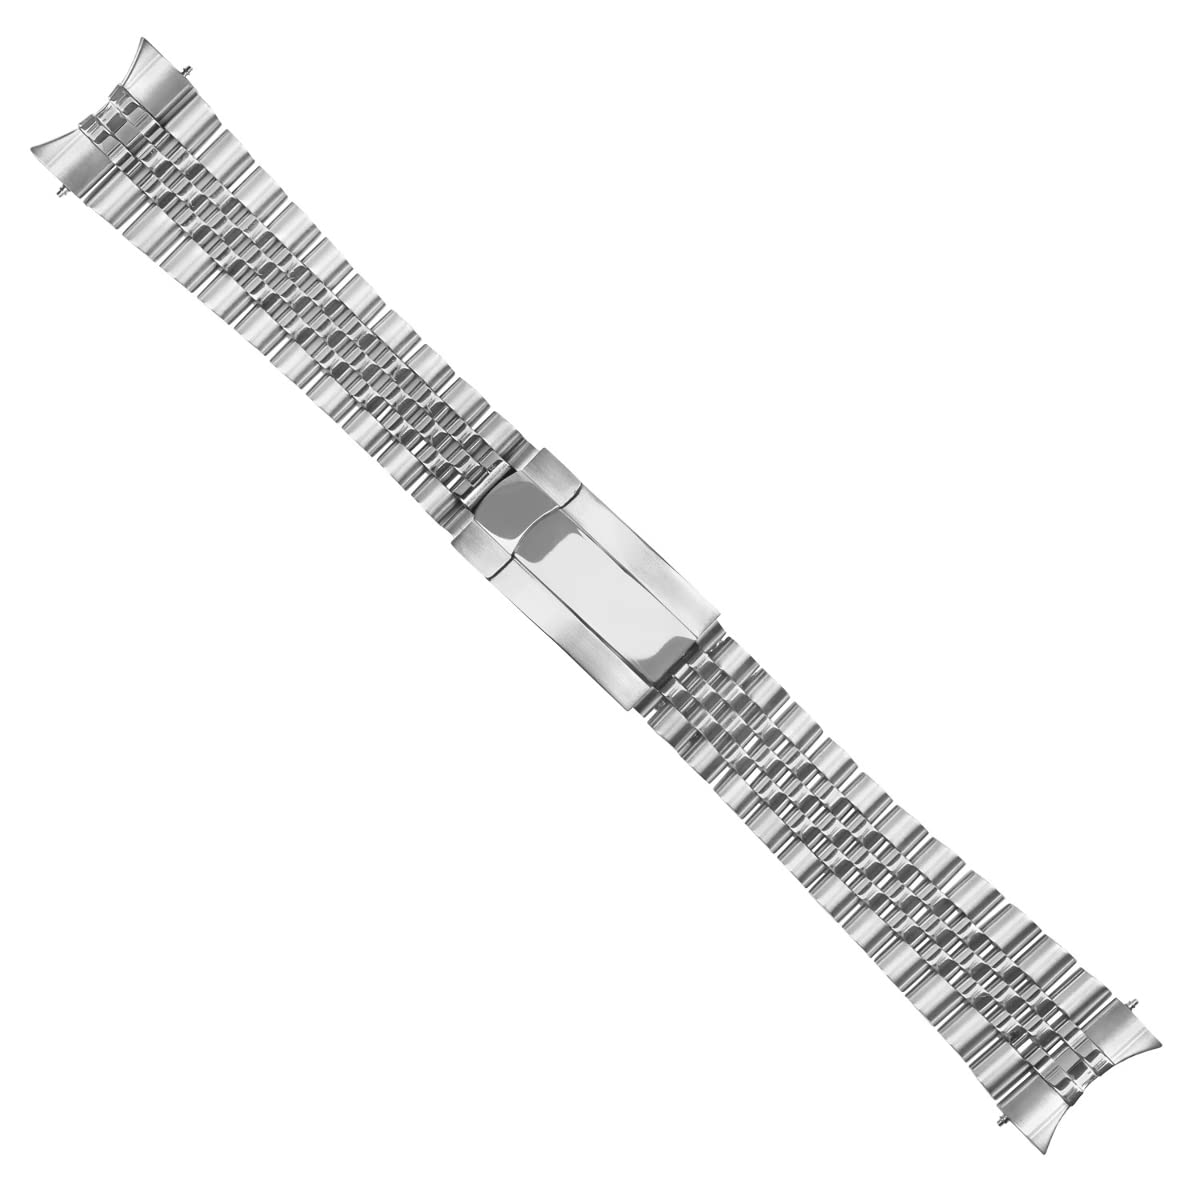 Ewatchparts JUBILEE WATCH BAND SOLID LINK COMPATIBLE WITH ROLEX DATEJUST GLIDE LOCK CLASP 21MM HEAVY S/S